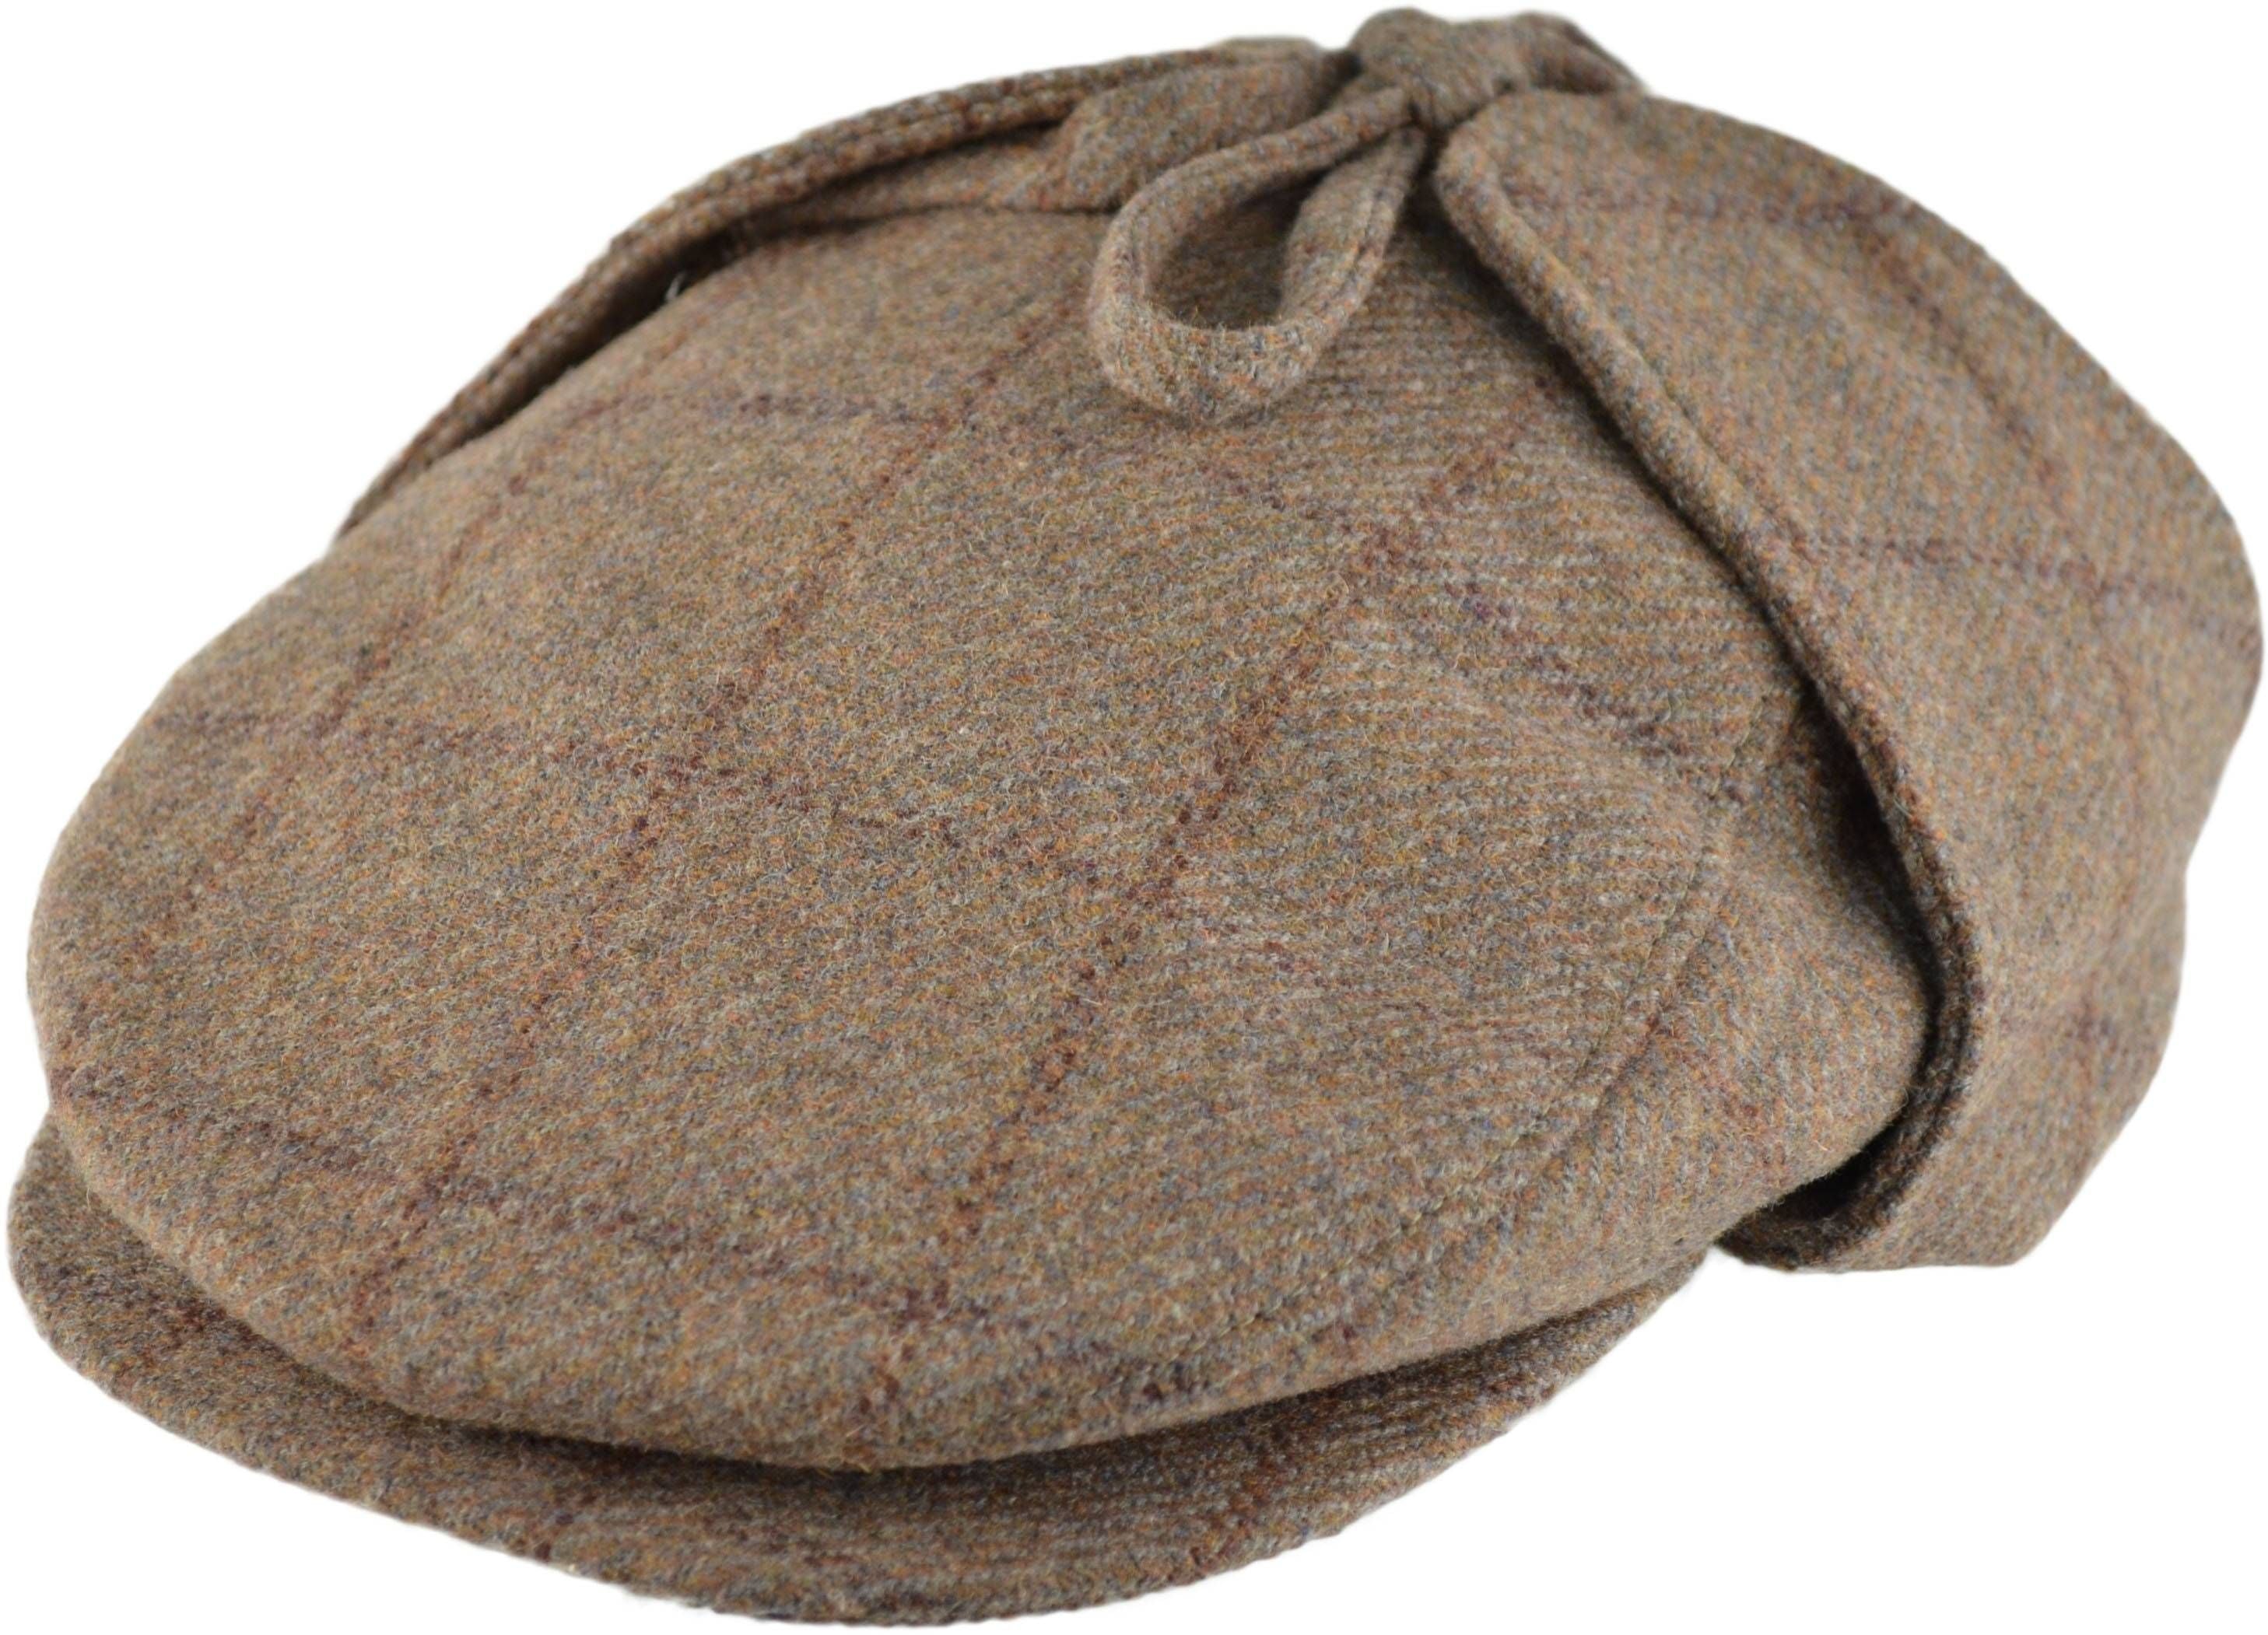 Tweed Flat Cap with Ear Flaps